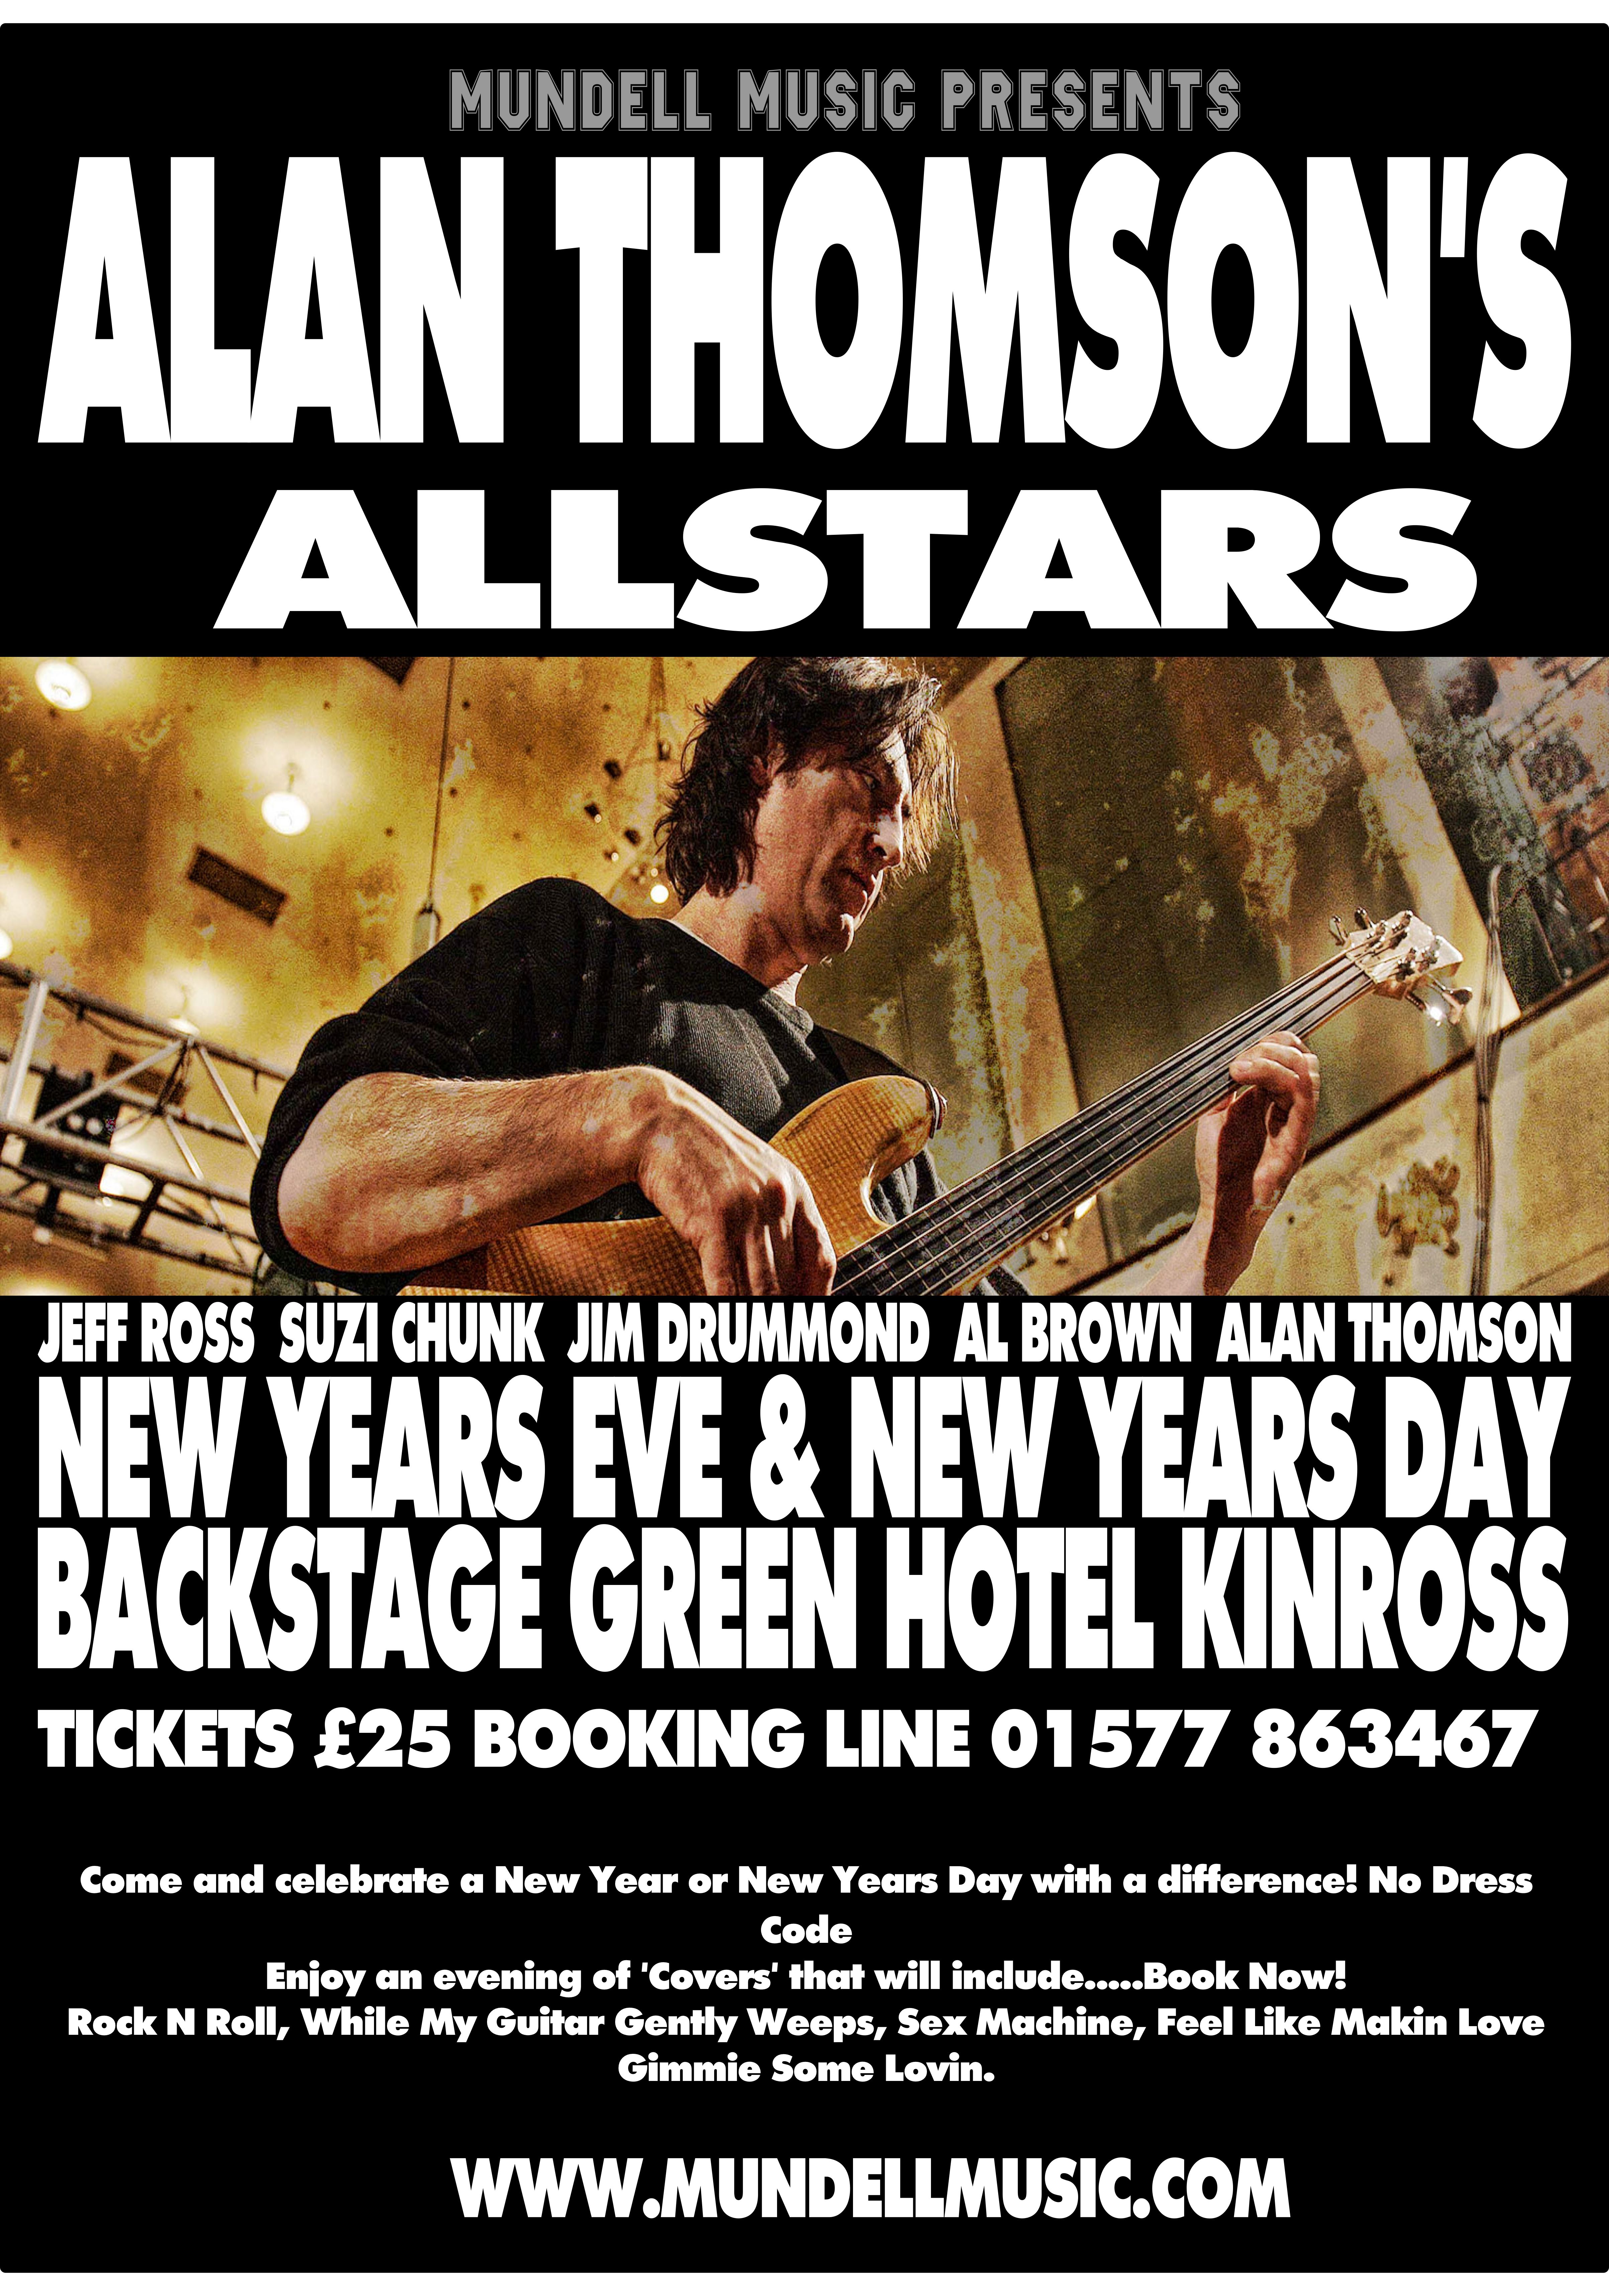 Rock N Roll For New Years Eve!